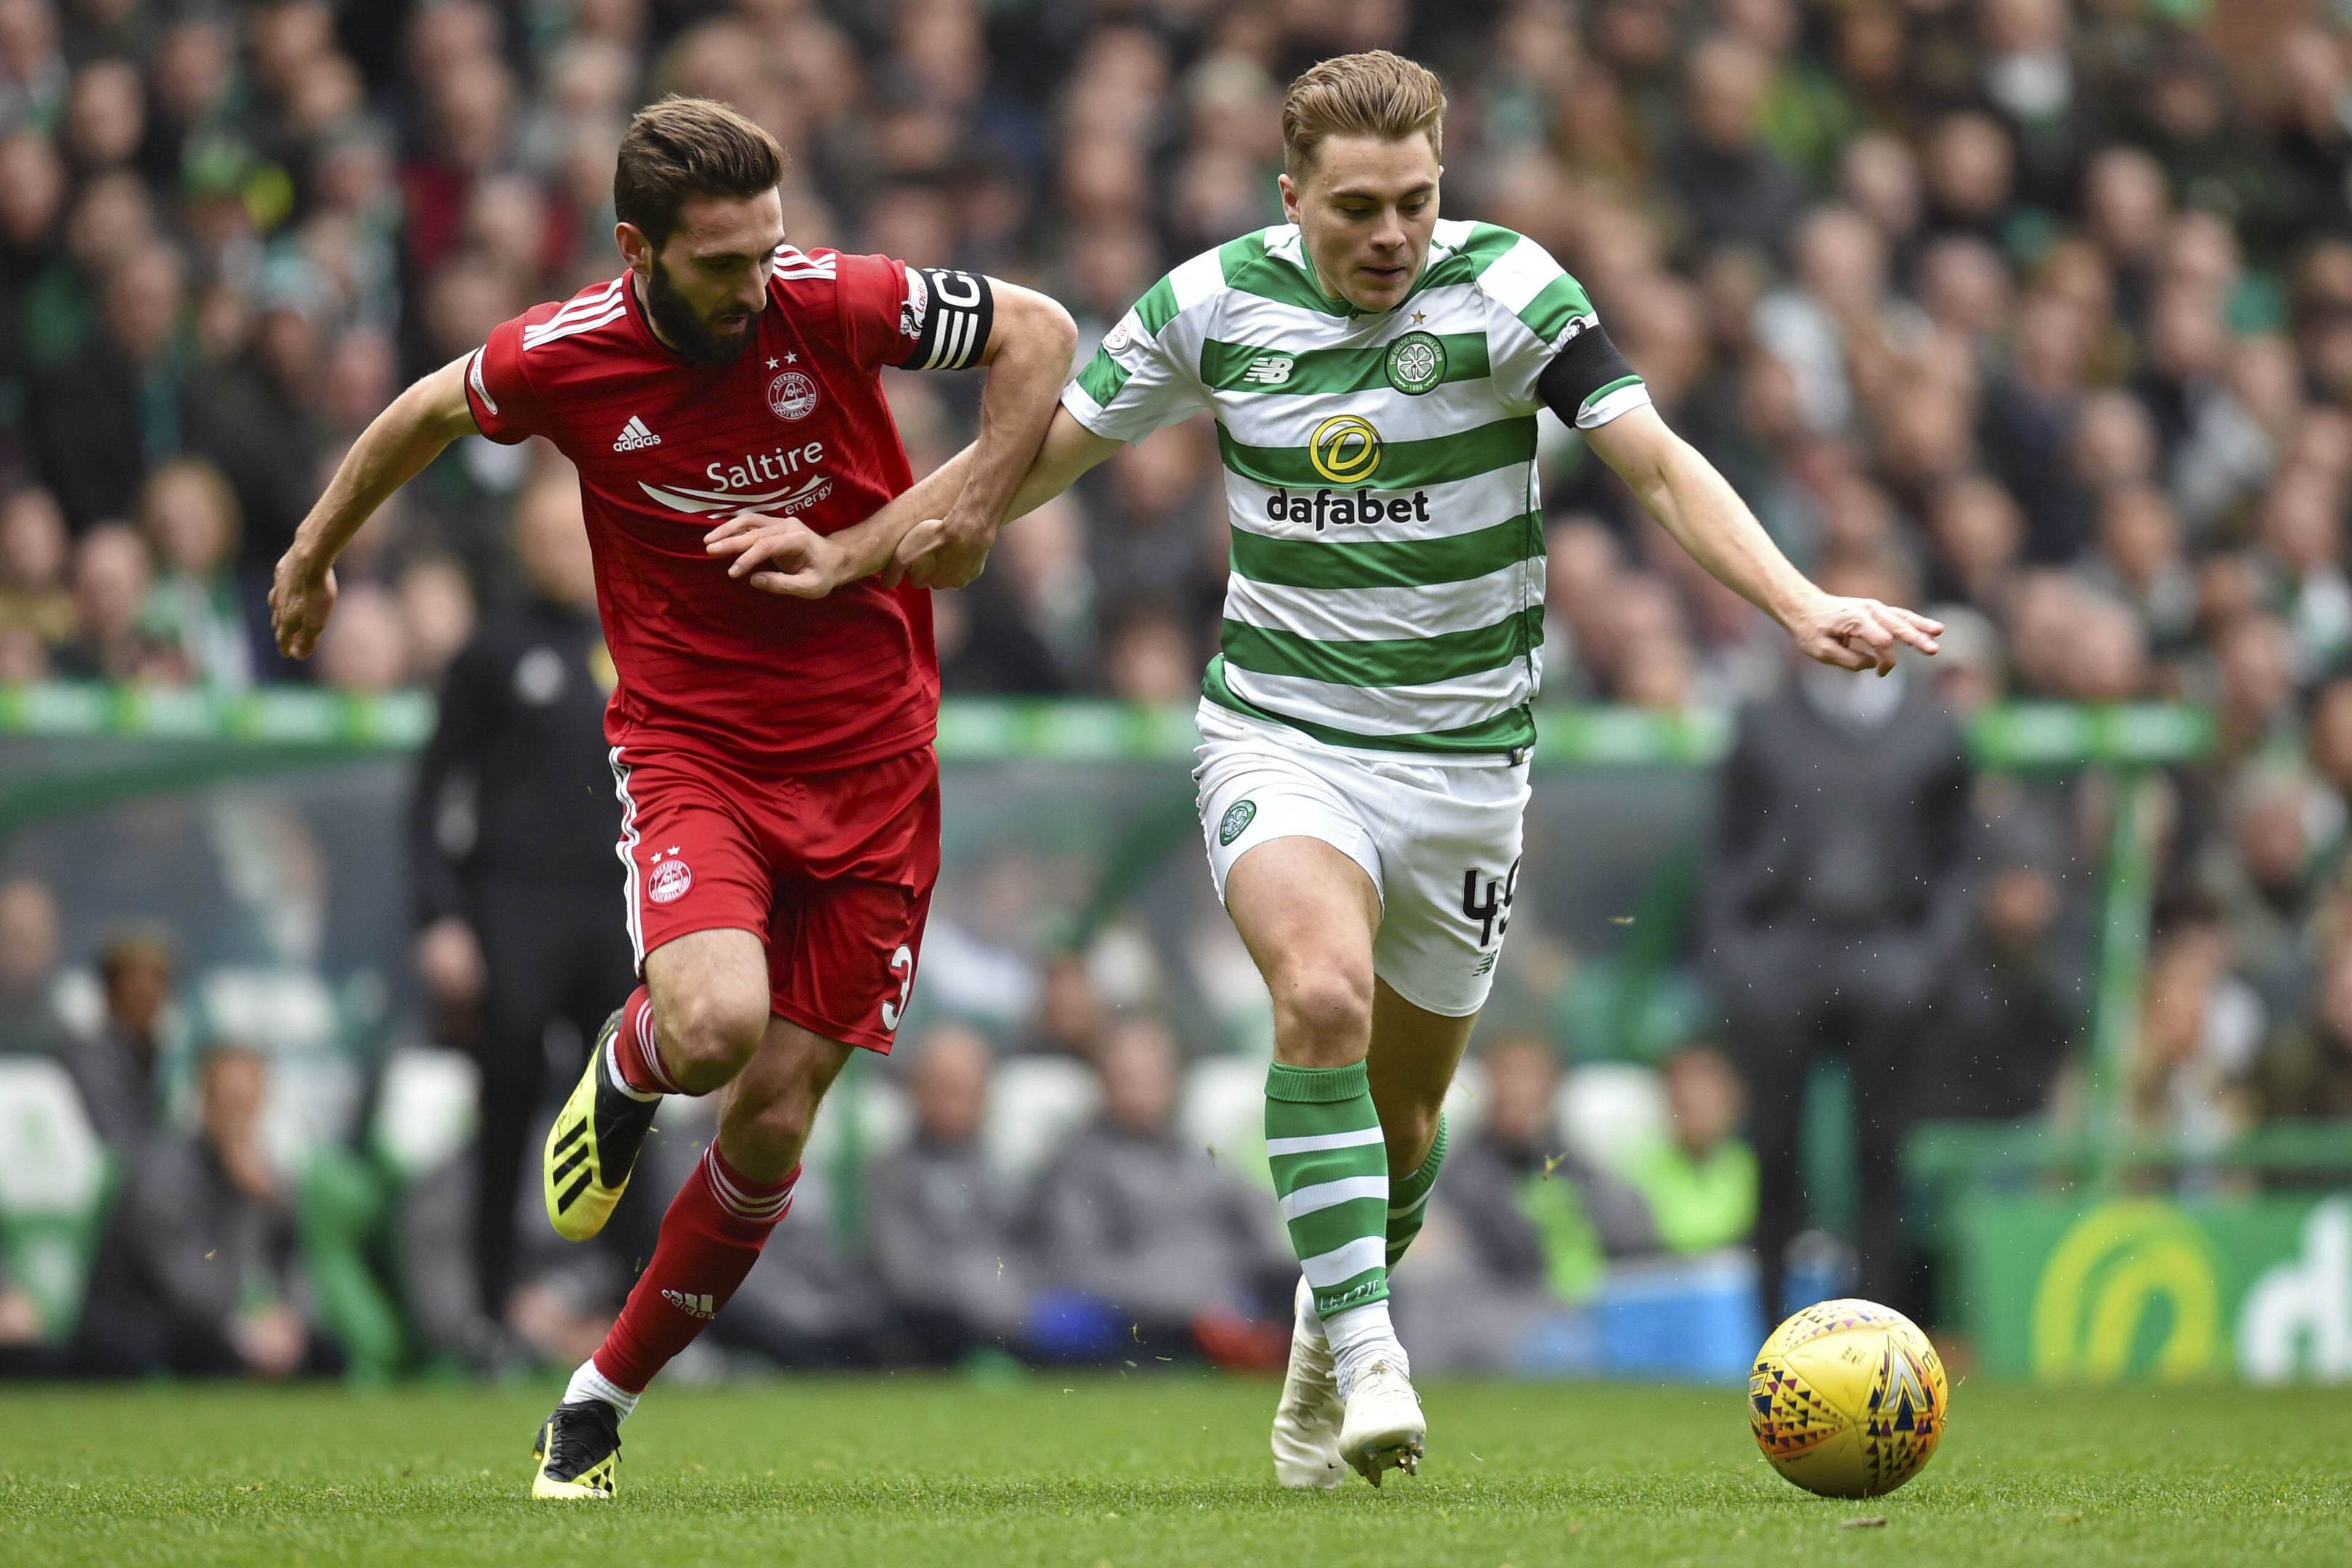 Aberdeen's Graeme Shinnie chases down Celtic's James Forrest